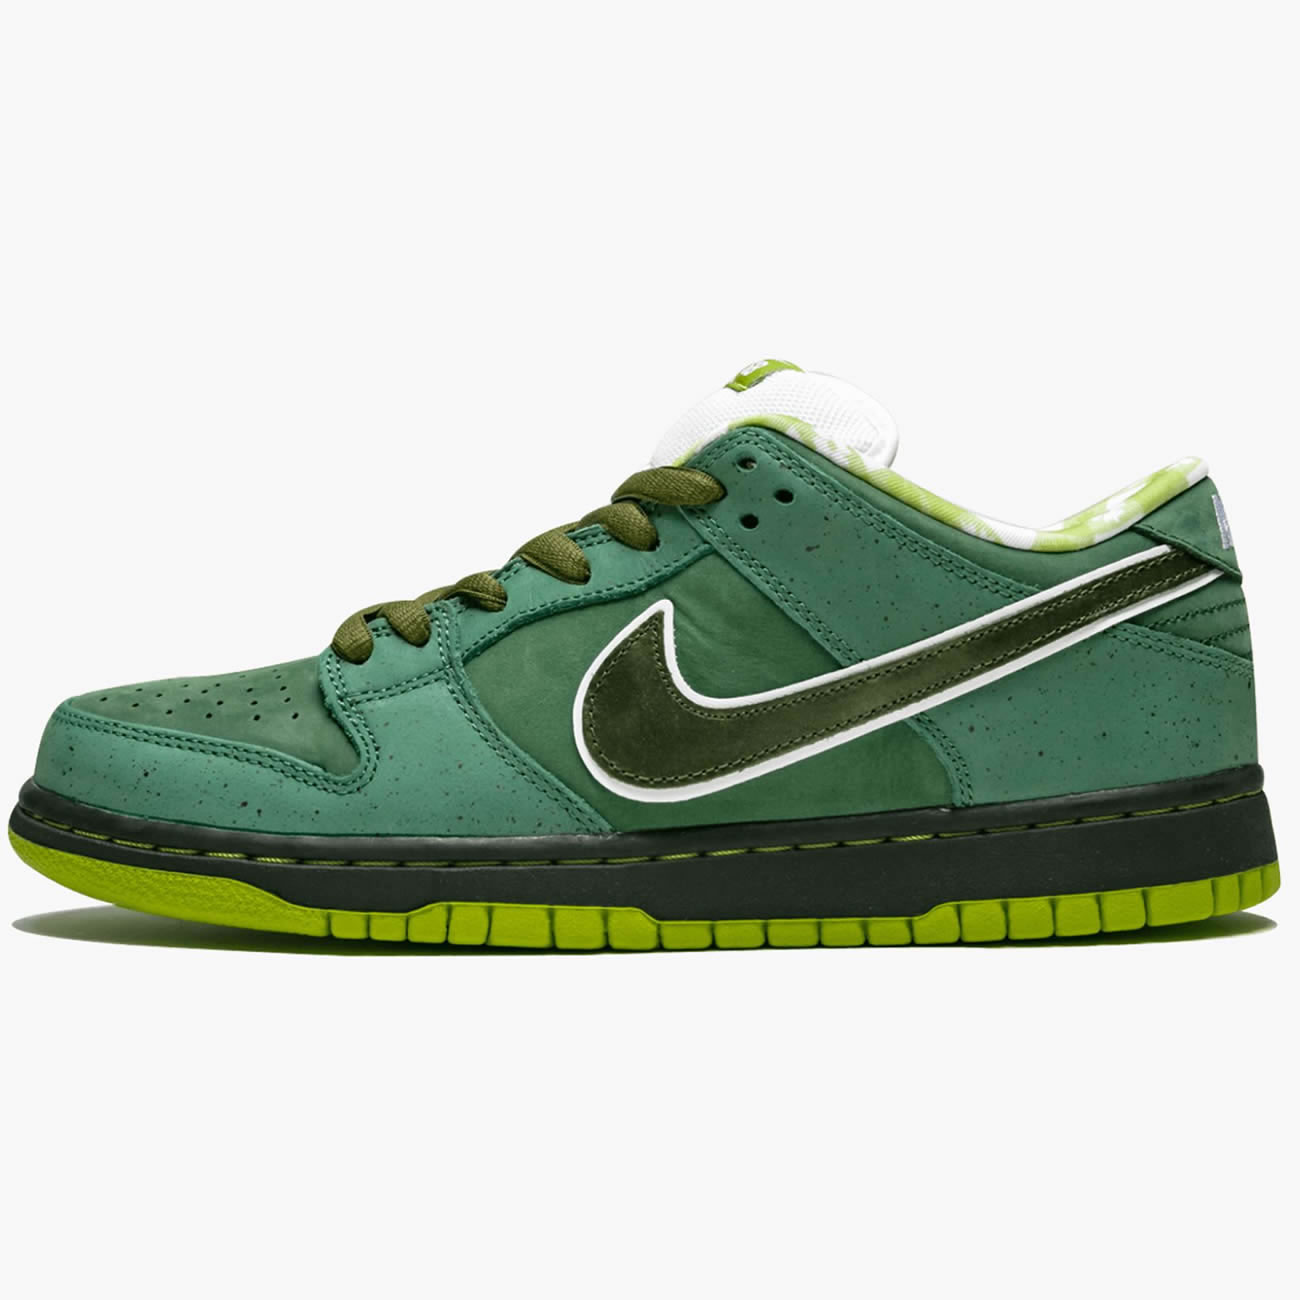 Nike Sb Dunk Low Concepts Green Lobster Bc1310 337 (1) - newkick.org